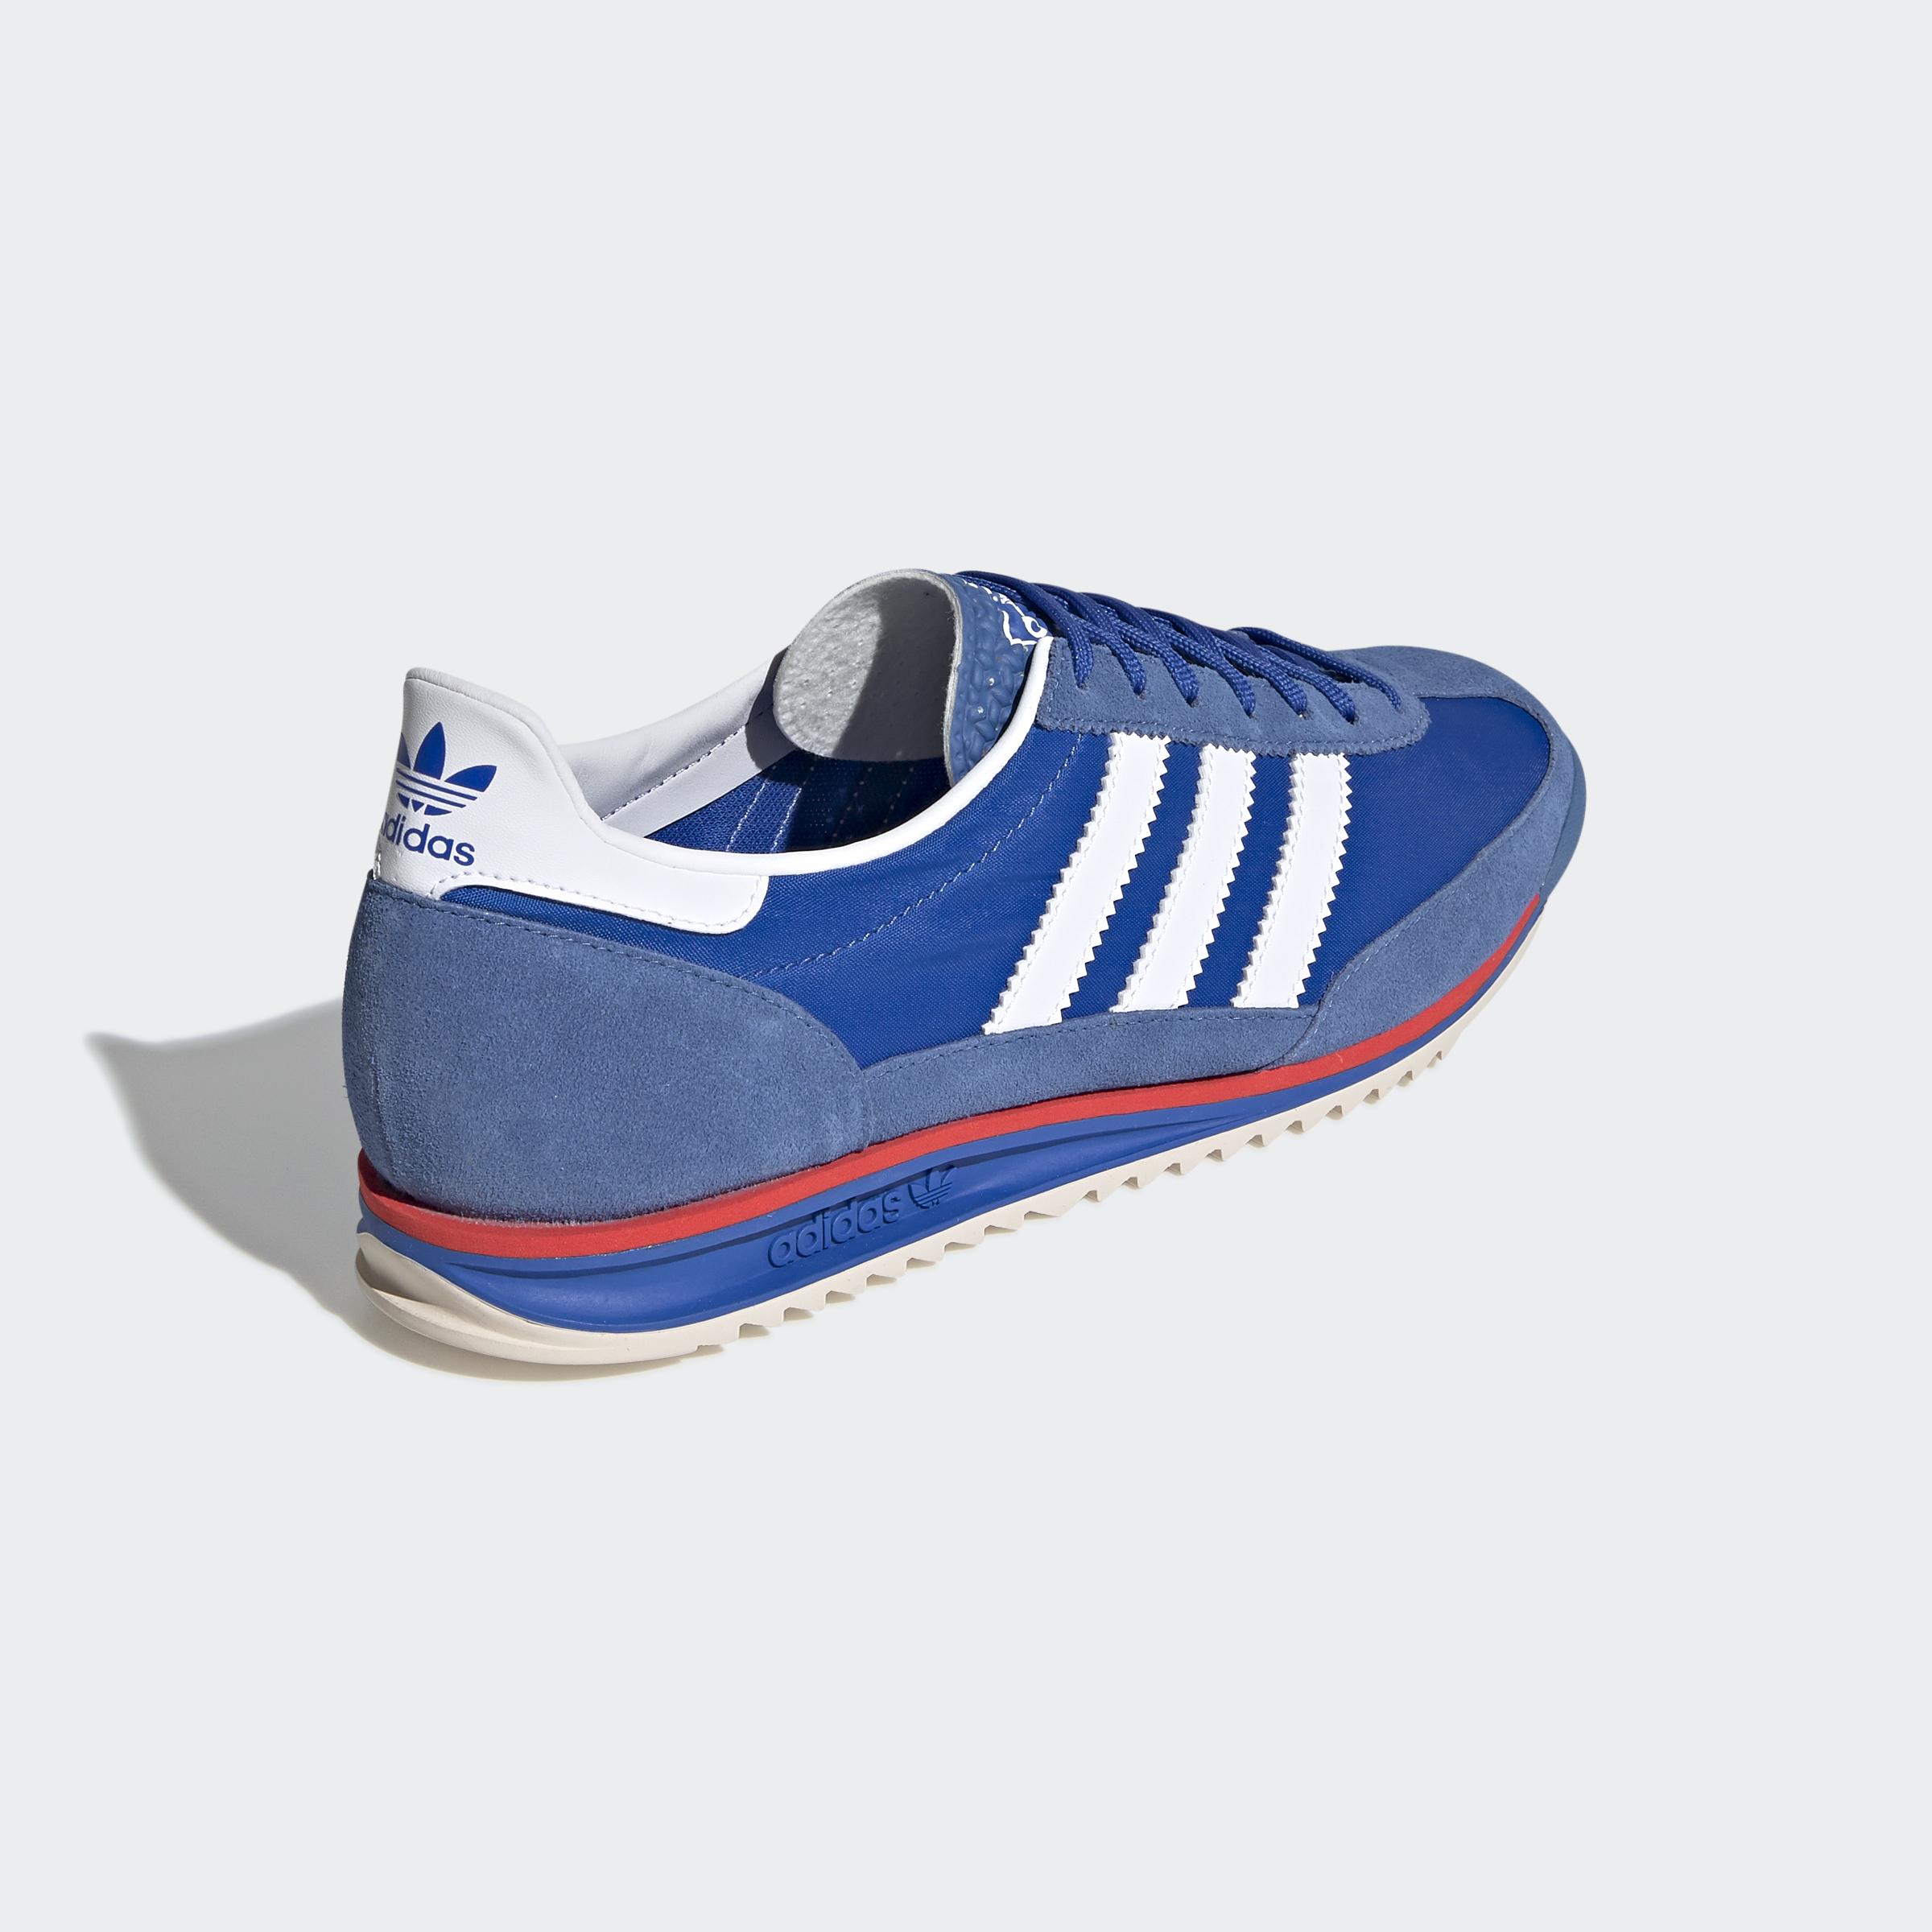 adidas SL 72 Shoes Athletic & Sneakers | eBay